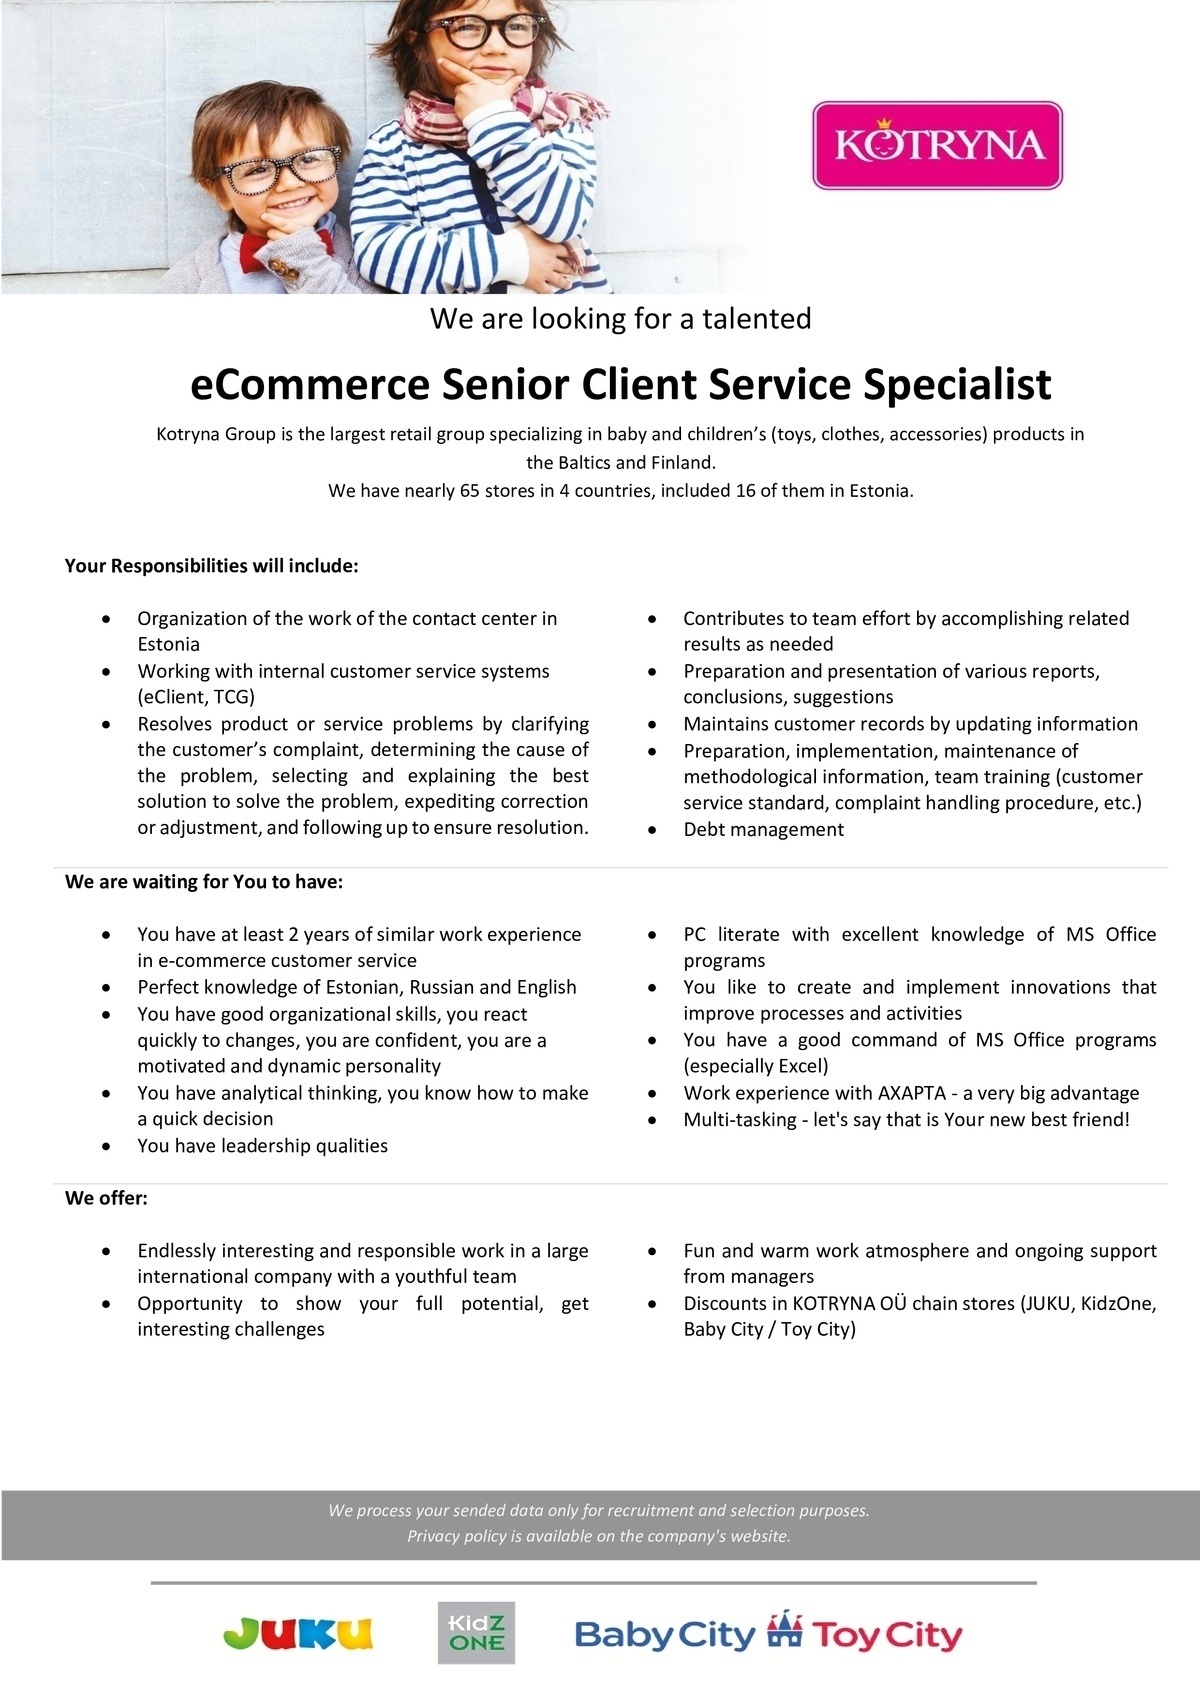 Kotryna OÜ ECommerce Senior Client Service Specialist